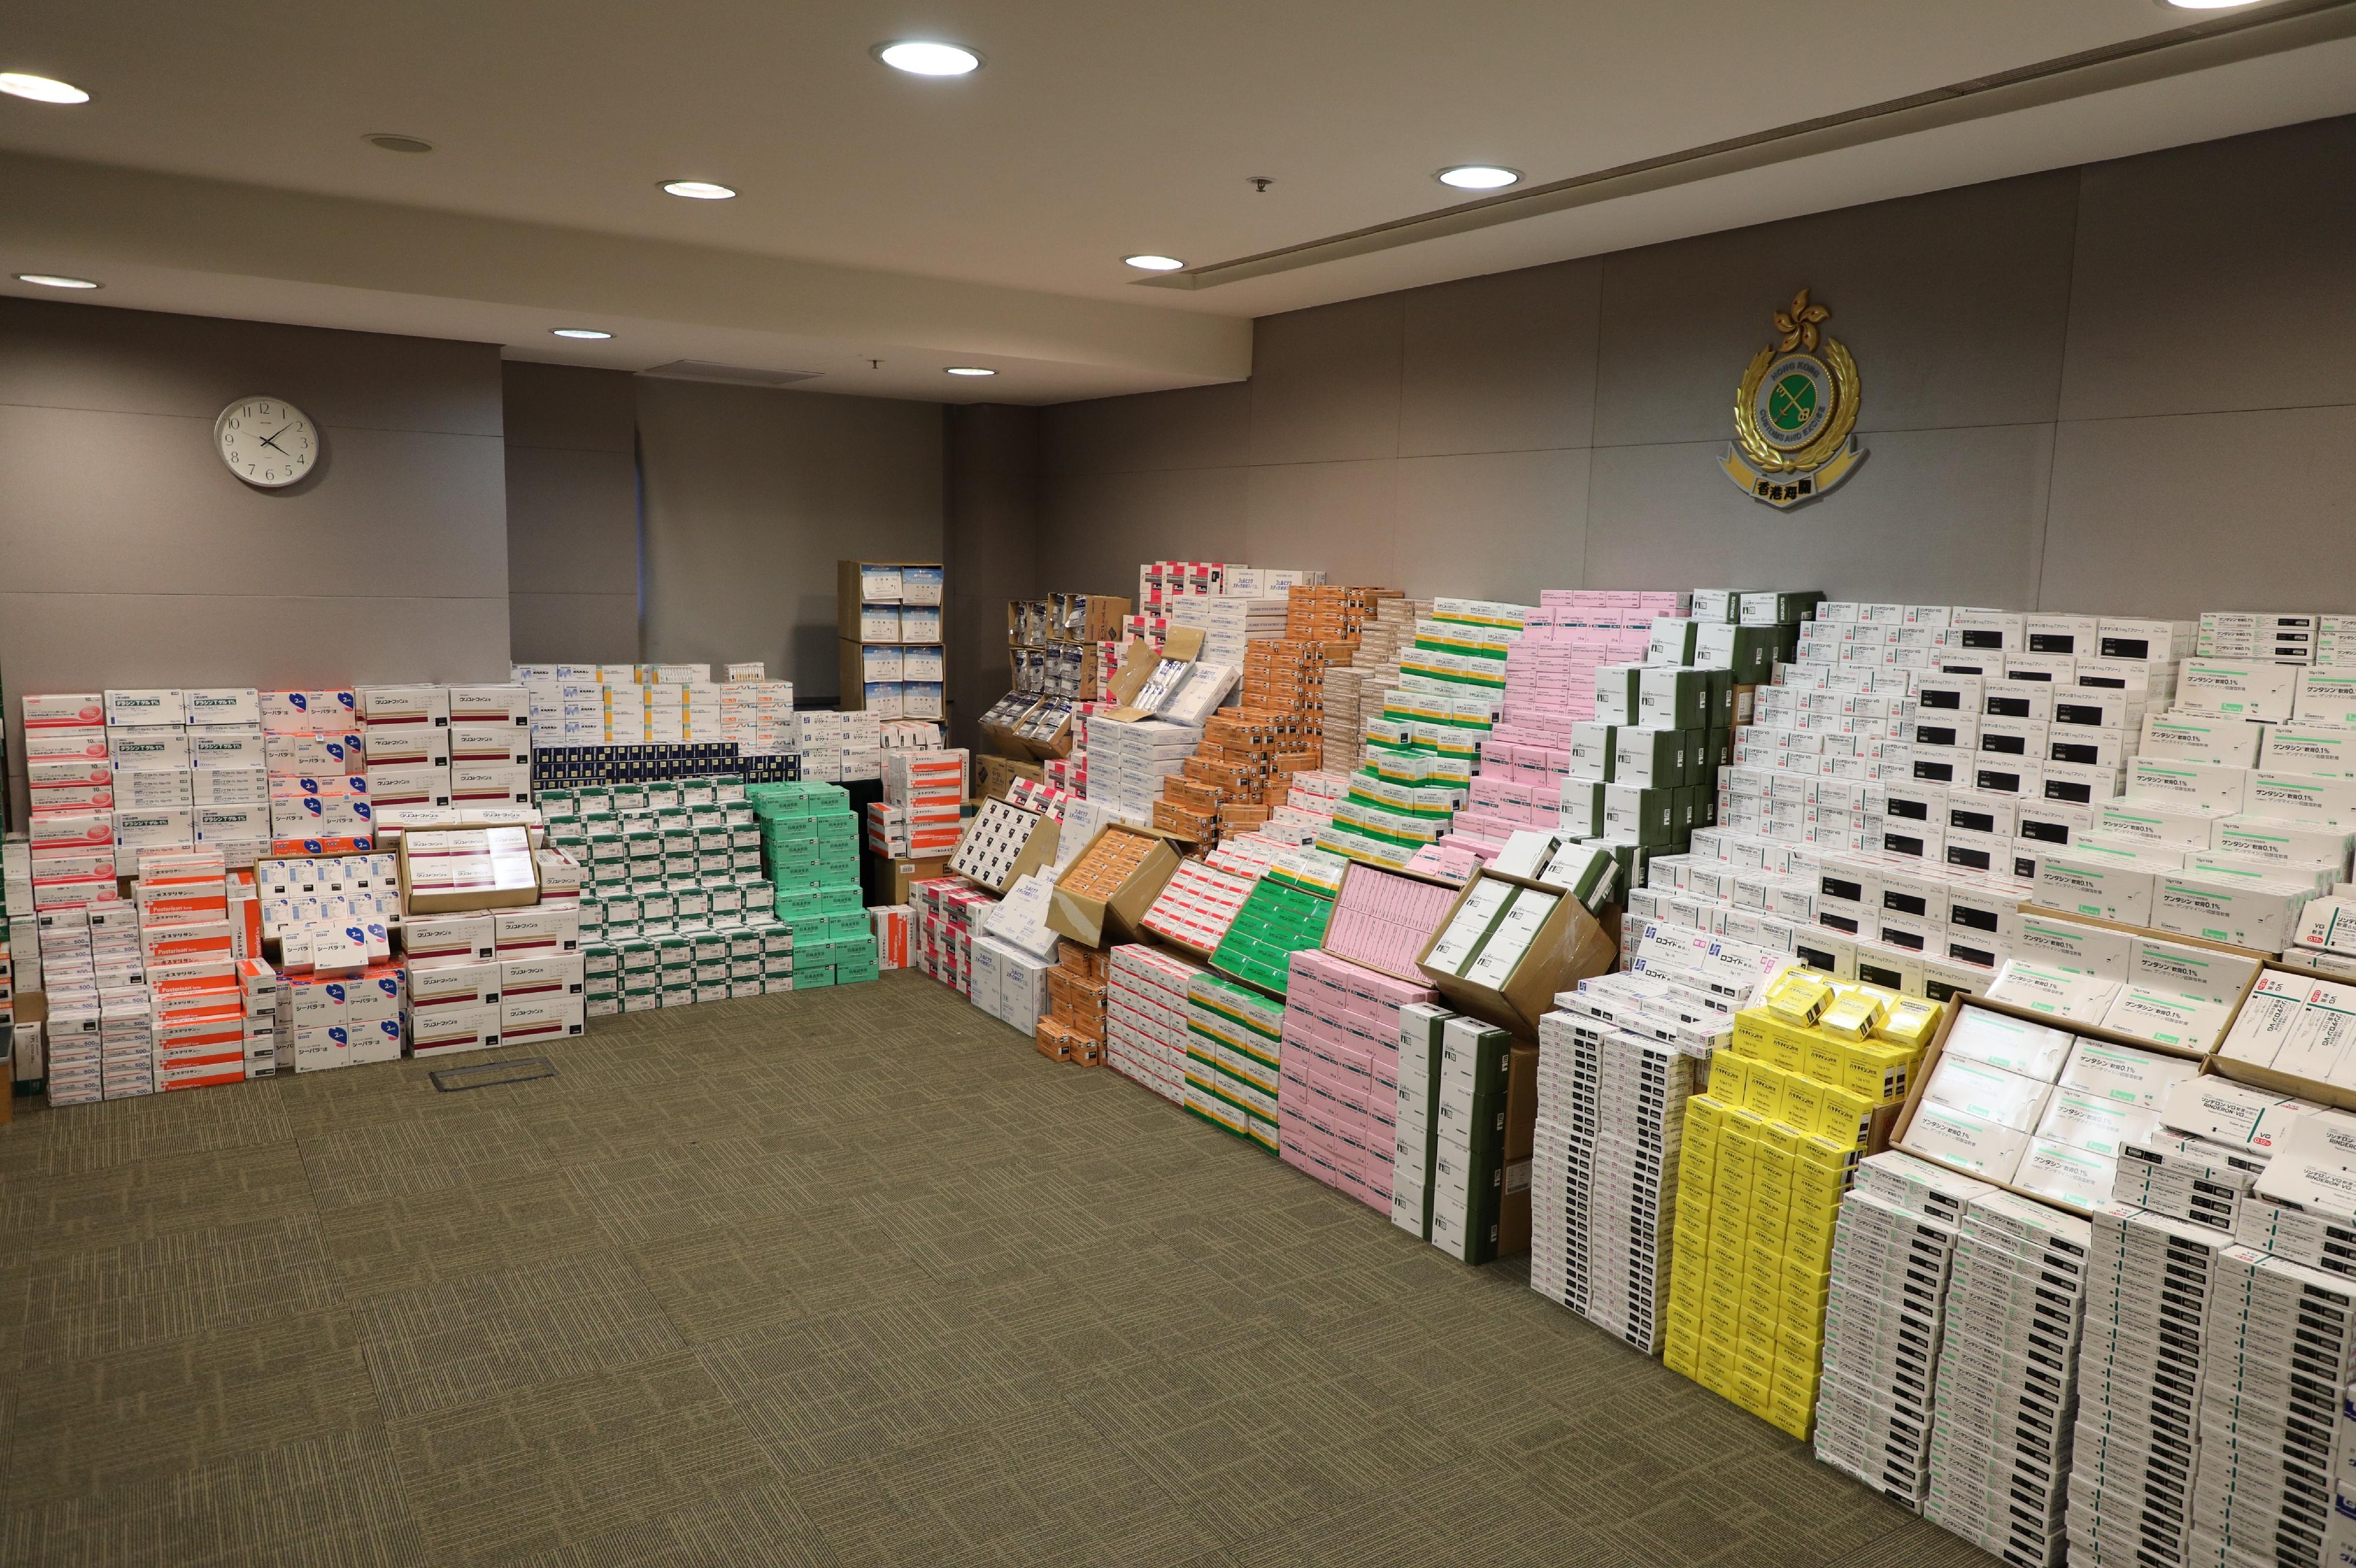 Hong Kong Customs on May 26 seized 32 types of suspected illegally imported controlled medicines, including beauty needles, dermatitis ointment, analgesic patches and eye drops, with a total seizure of about 900 000 pieces and an estimated market value of about $19 million, at the Kwai Chung Customhouse Cargo Examination Compound. Photo shows some of the suspected illegally imported controlled medicines seized.